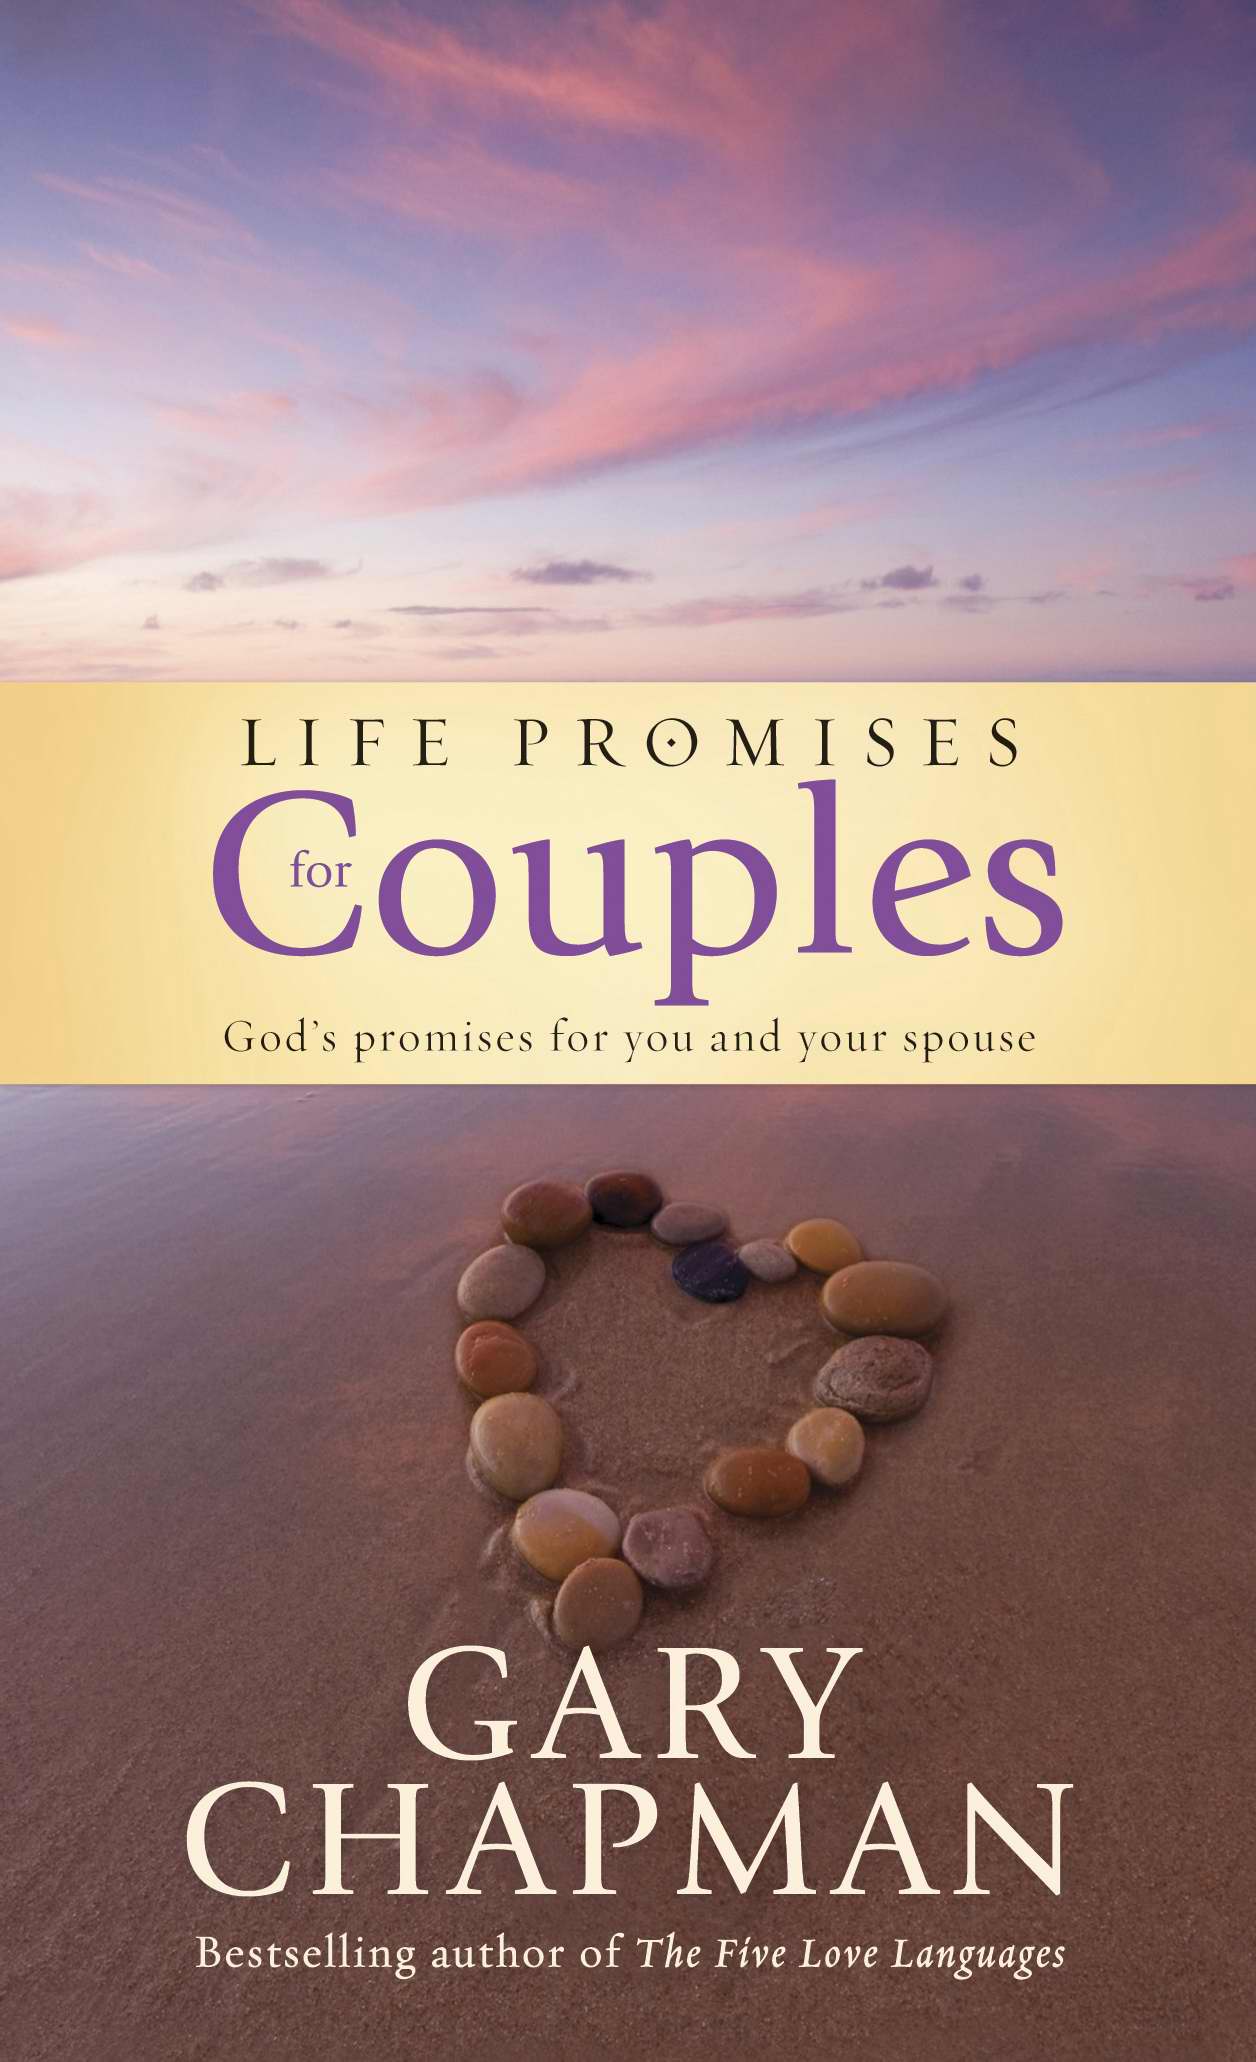 Image of Life Promises for Couples other